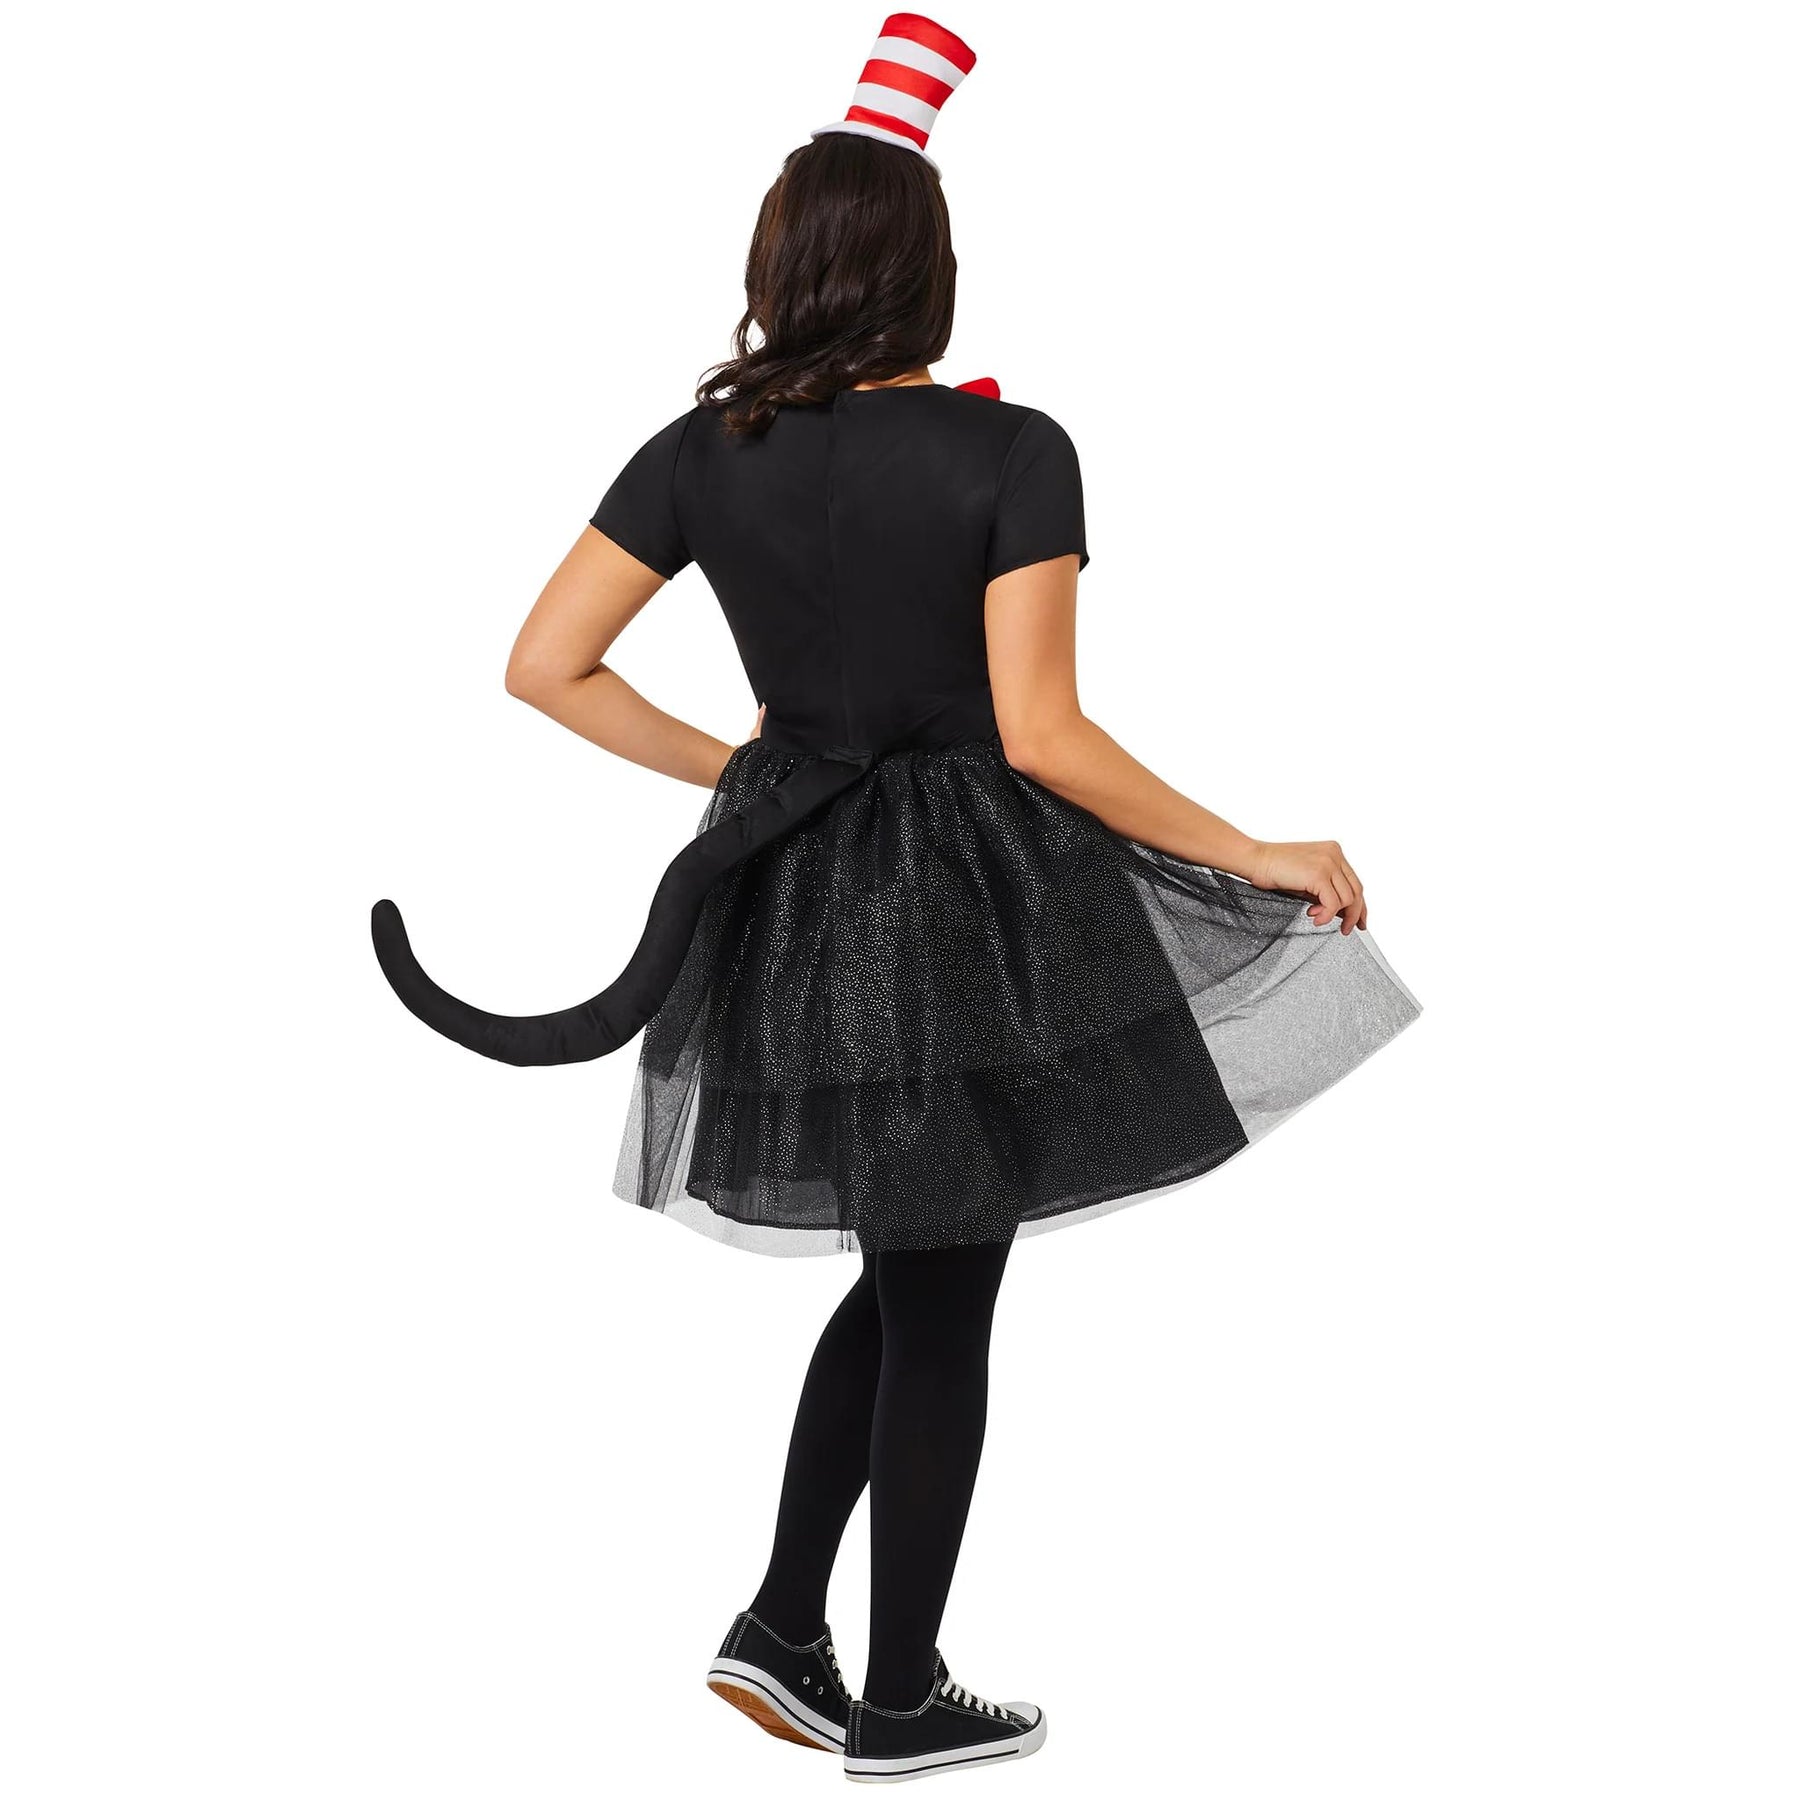 Dr Seuss Cat In The Hat Dress Adult Costume